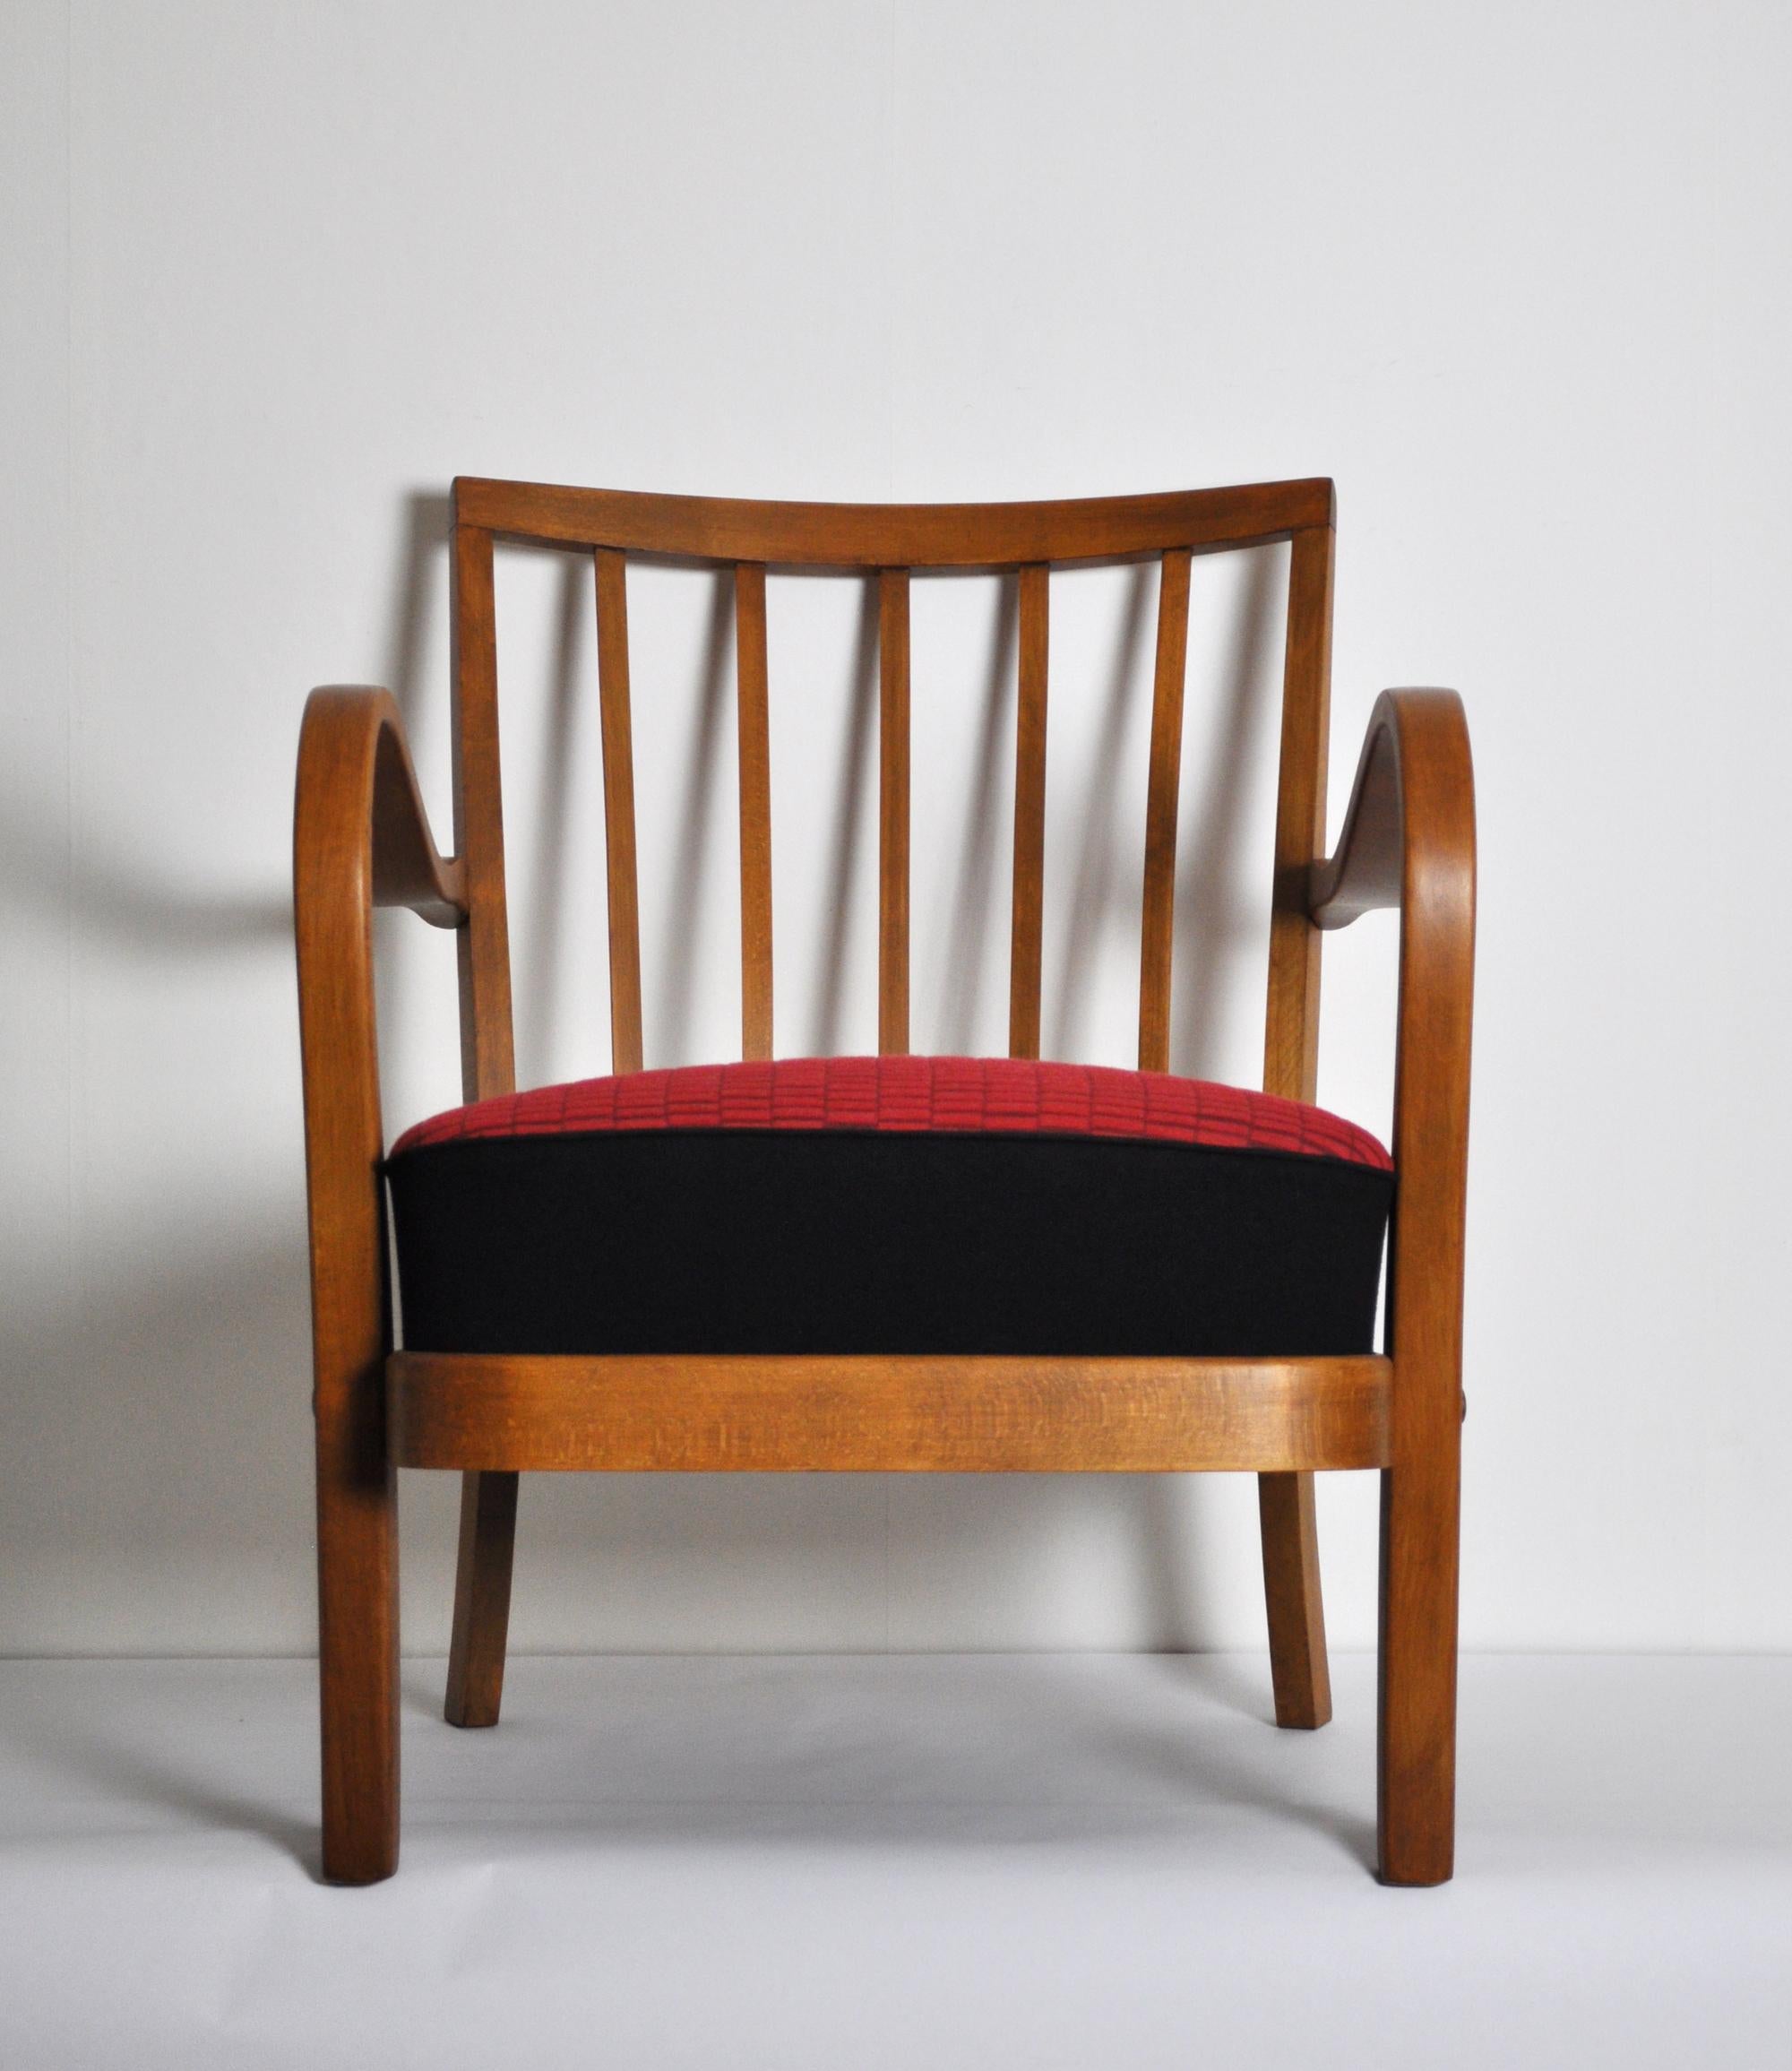 Danish cabinetmaker armchair attributed to Fritz Hansen, early 20th century, renovated. Upholstered in a fine condition.

Dimensions:
65 W x 72 D x 76,5 H cm
Seat height 43 cm.